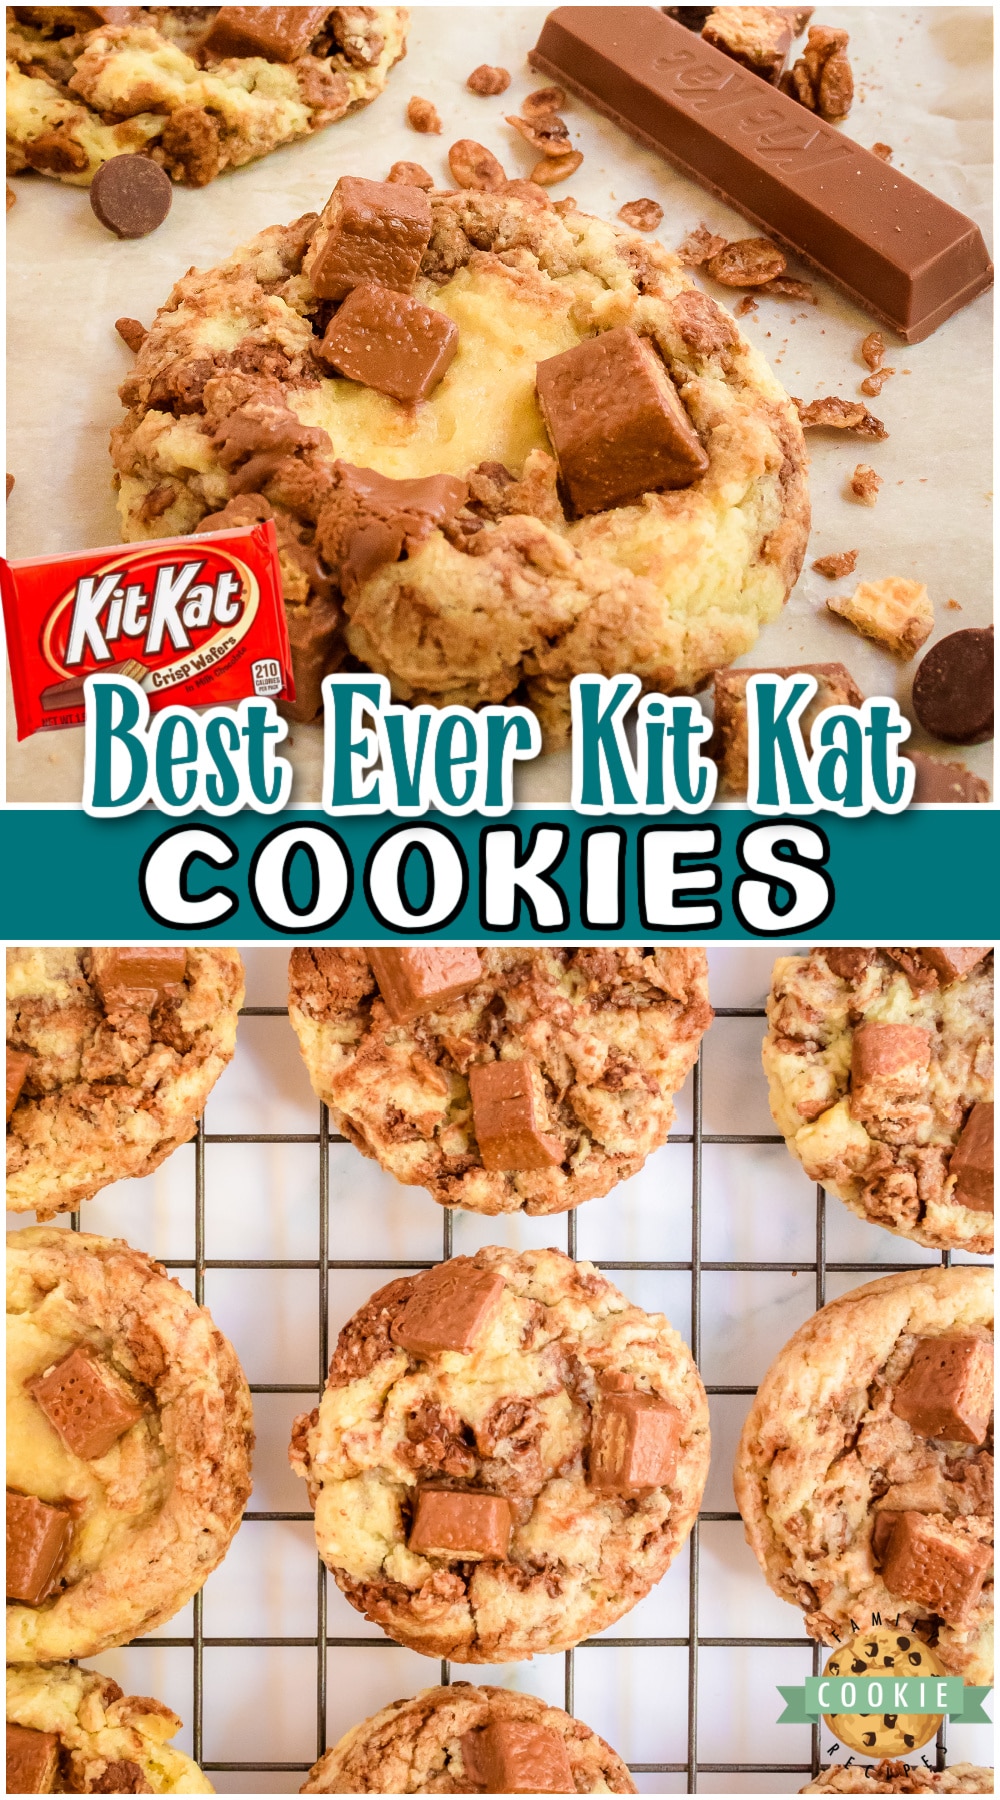 Kit Kat Cookies for anyone who LOVES the chocolatey crisp of Kit Kats! These candy bar cookies are loaded with Kit Kats, chocolate Krispies & chocolate swirl!